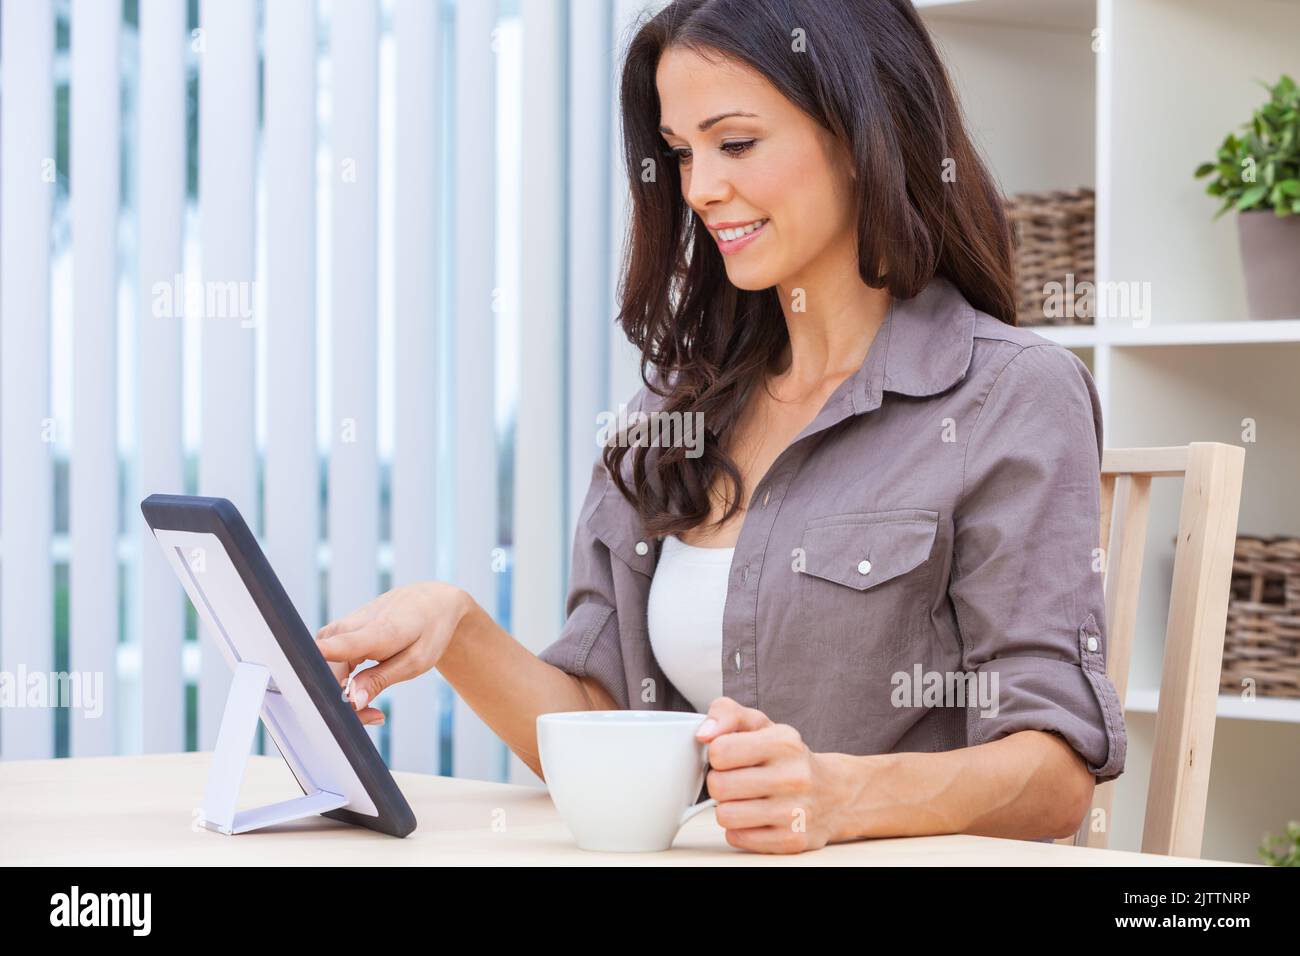 Beautiful girl young woman female at home using her tablet computer for social media, work or on line shopping smiling drinking a cup of tea or coffee Stock Photo